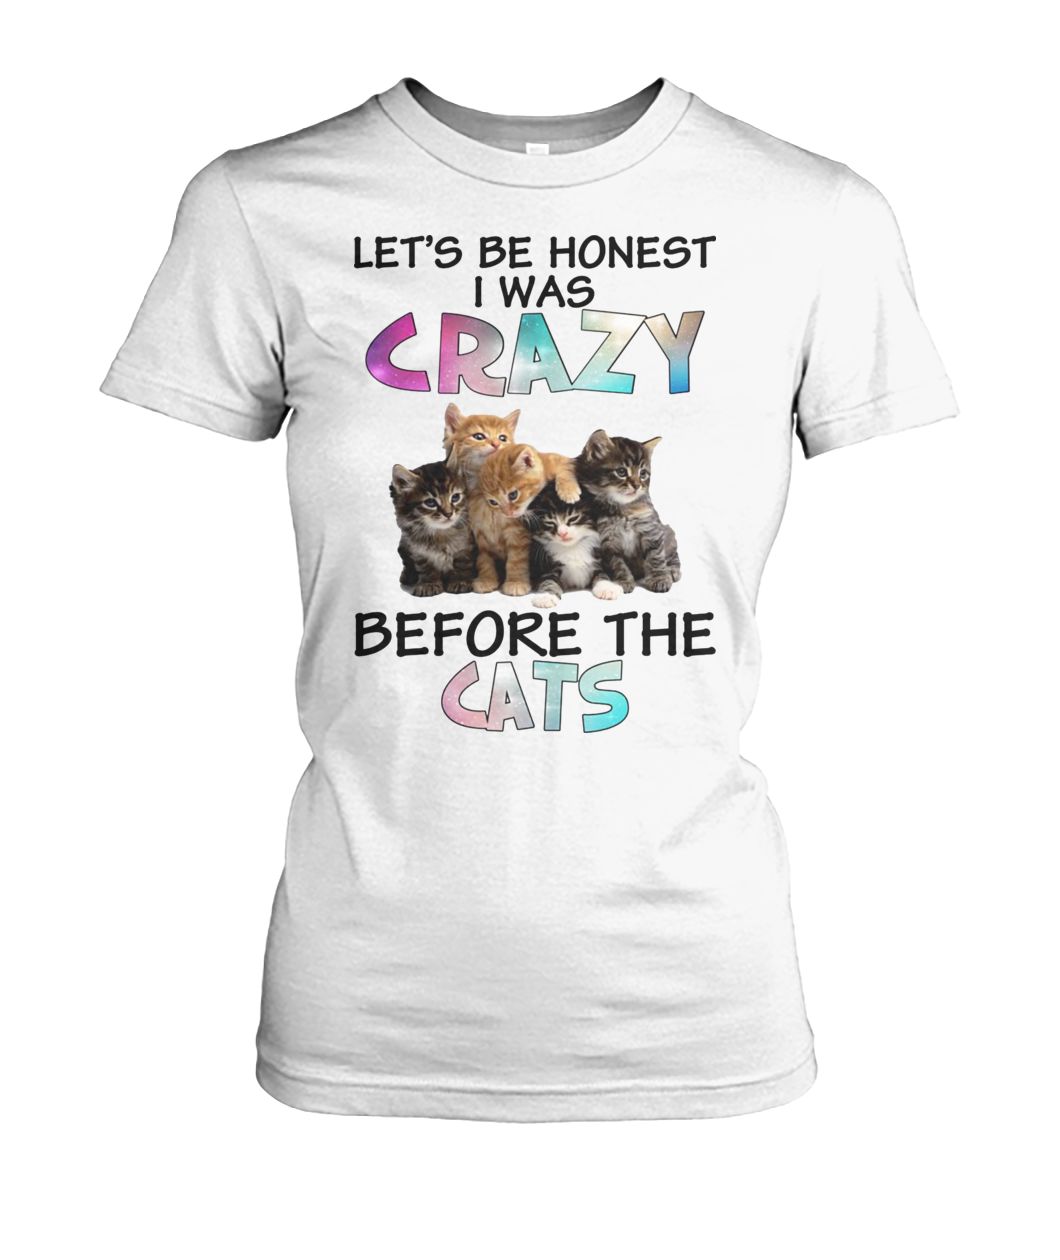 Let's be honest I was crazy before the cats women's crew tee